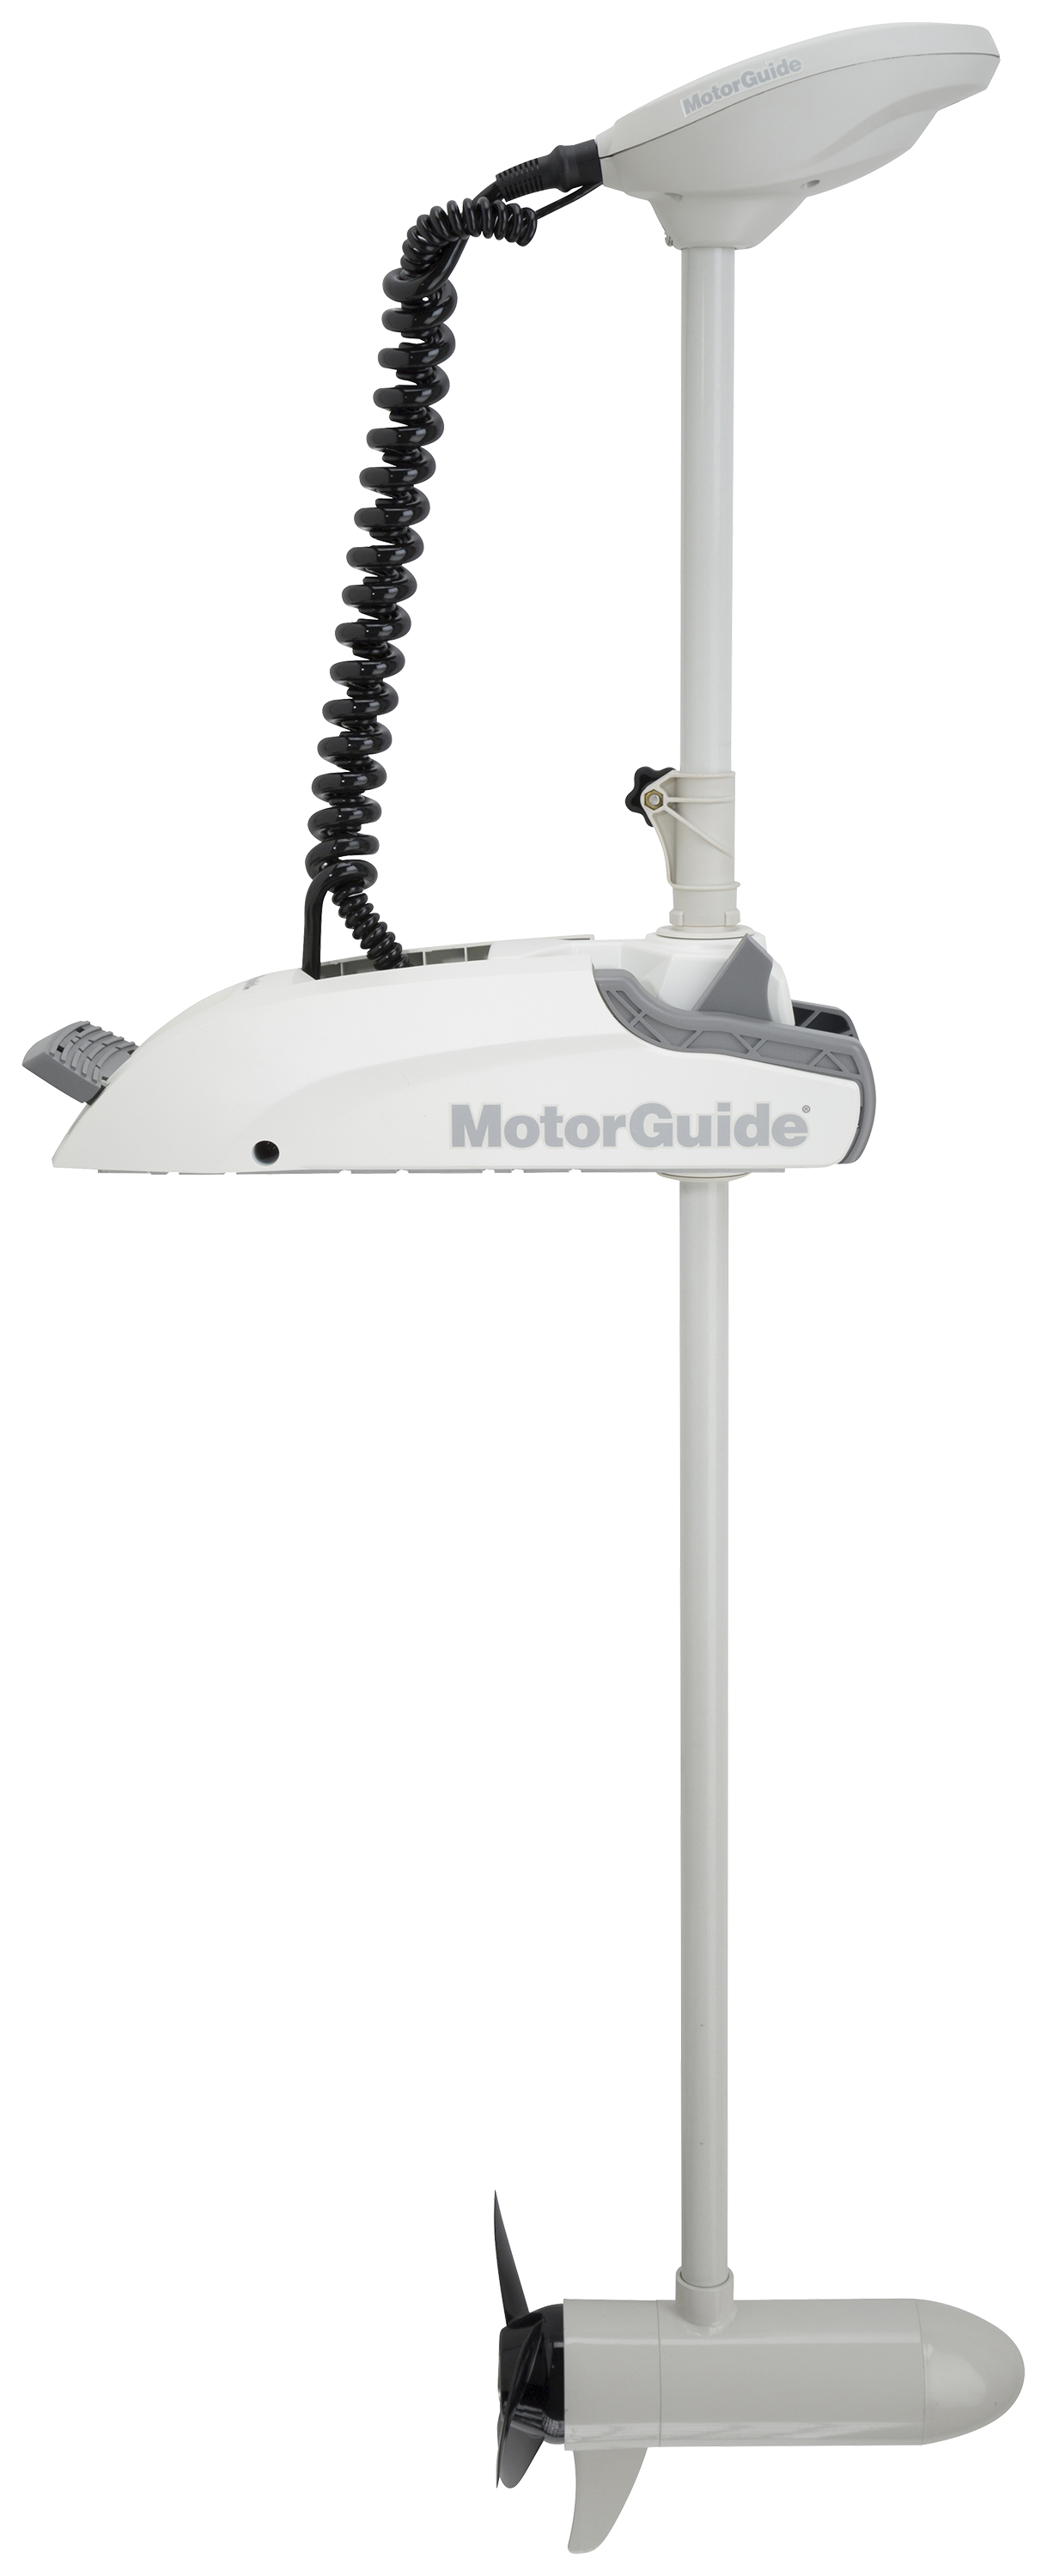 MotorGuide Xi3 Saltwater Wireless Remote Trolling Motor with GPS